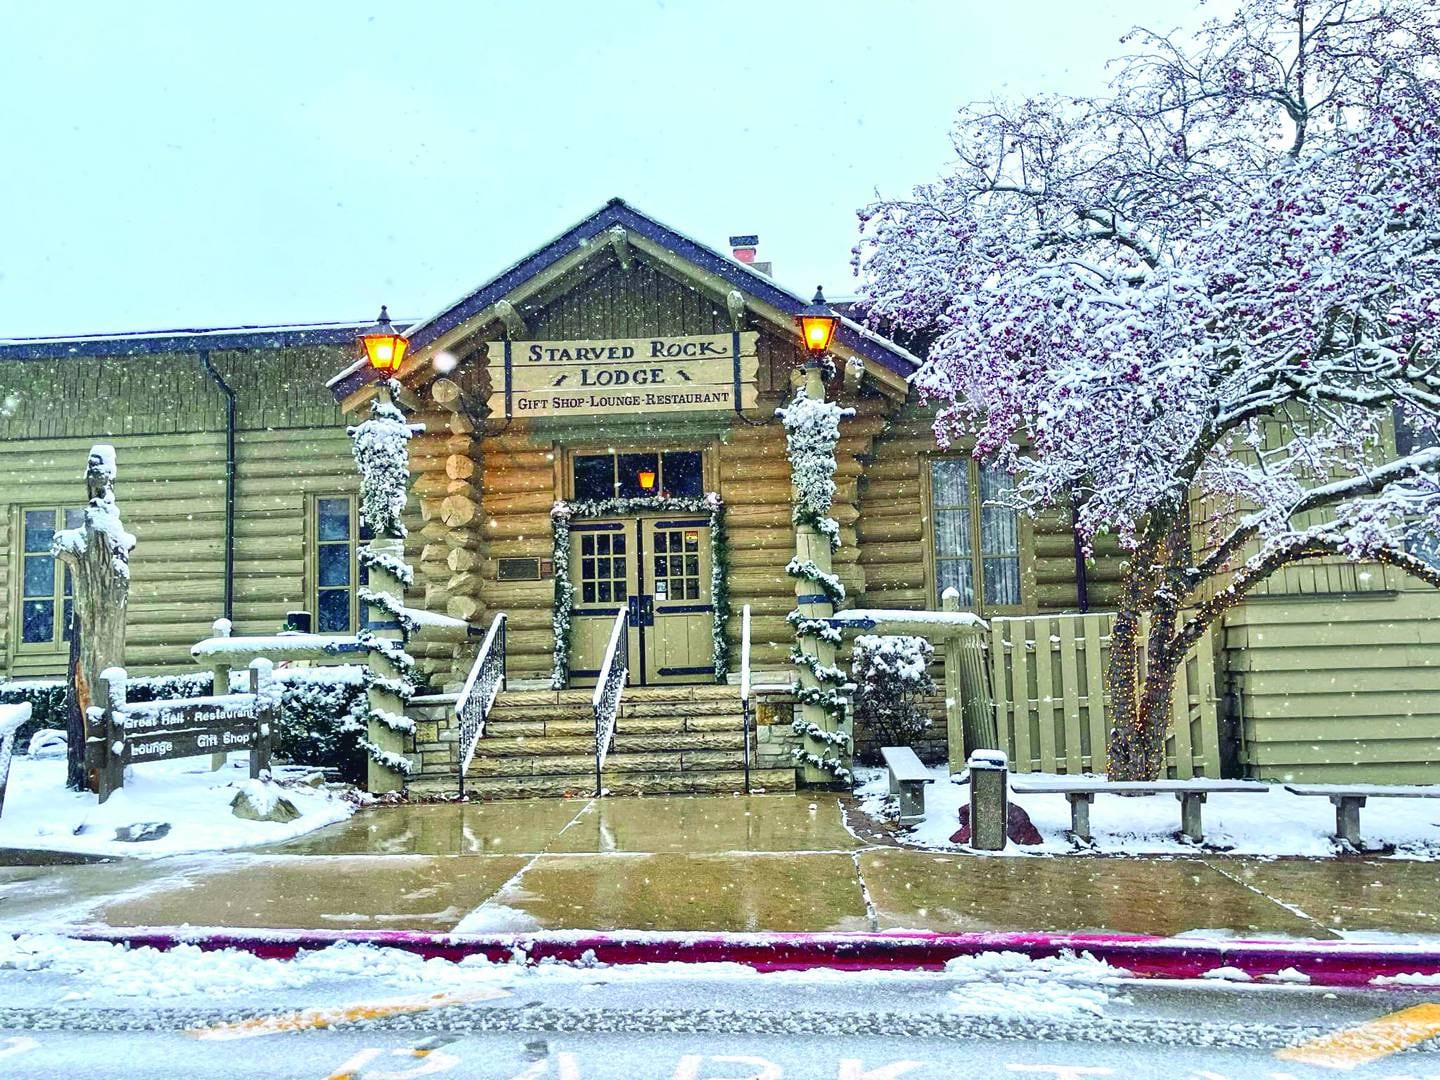 Starved Rock Lodge in Oglesby, Ill. has plenty of holiday activities for the entire family.